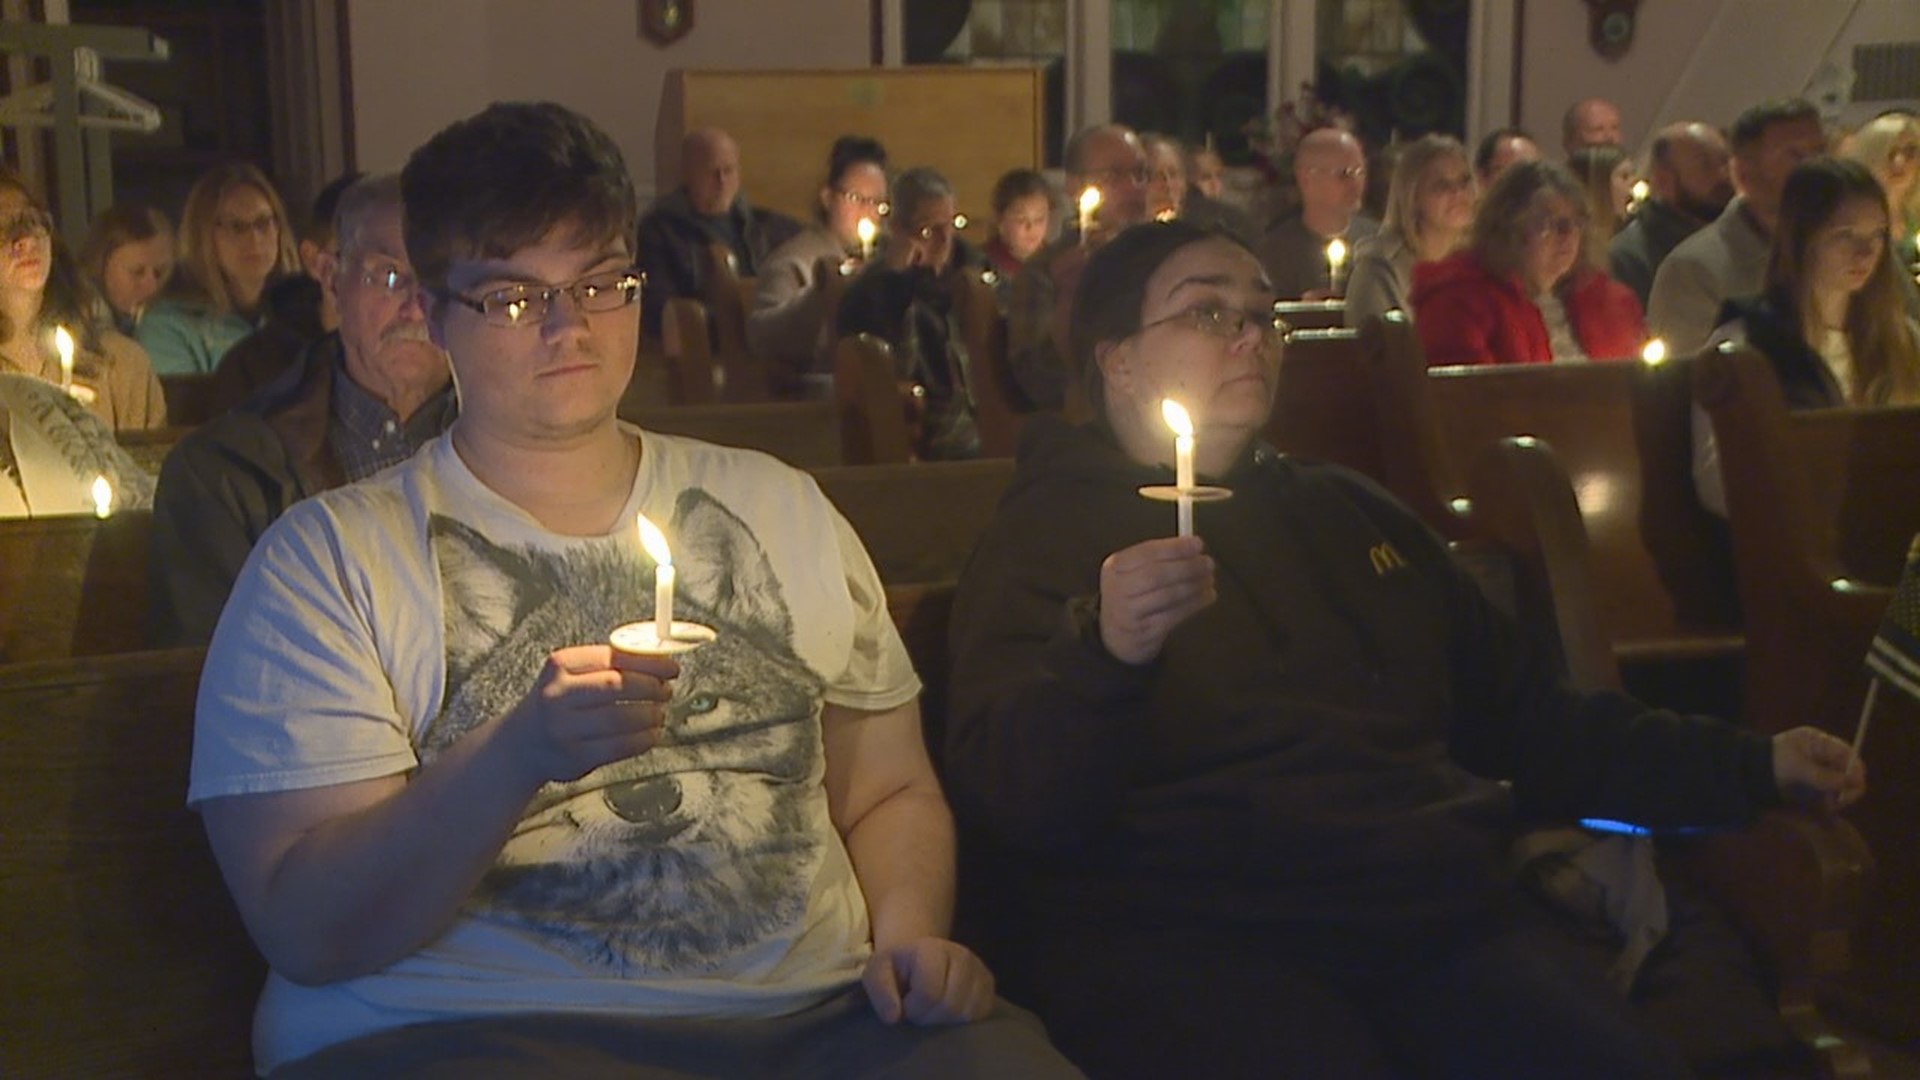 Dozens of people packed the United Methodist Church, sharing memories and offering prayers for Richard "Rick" Young.